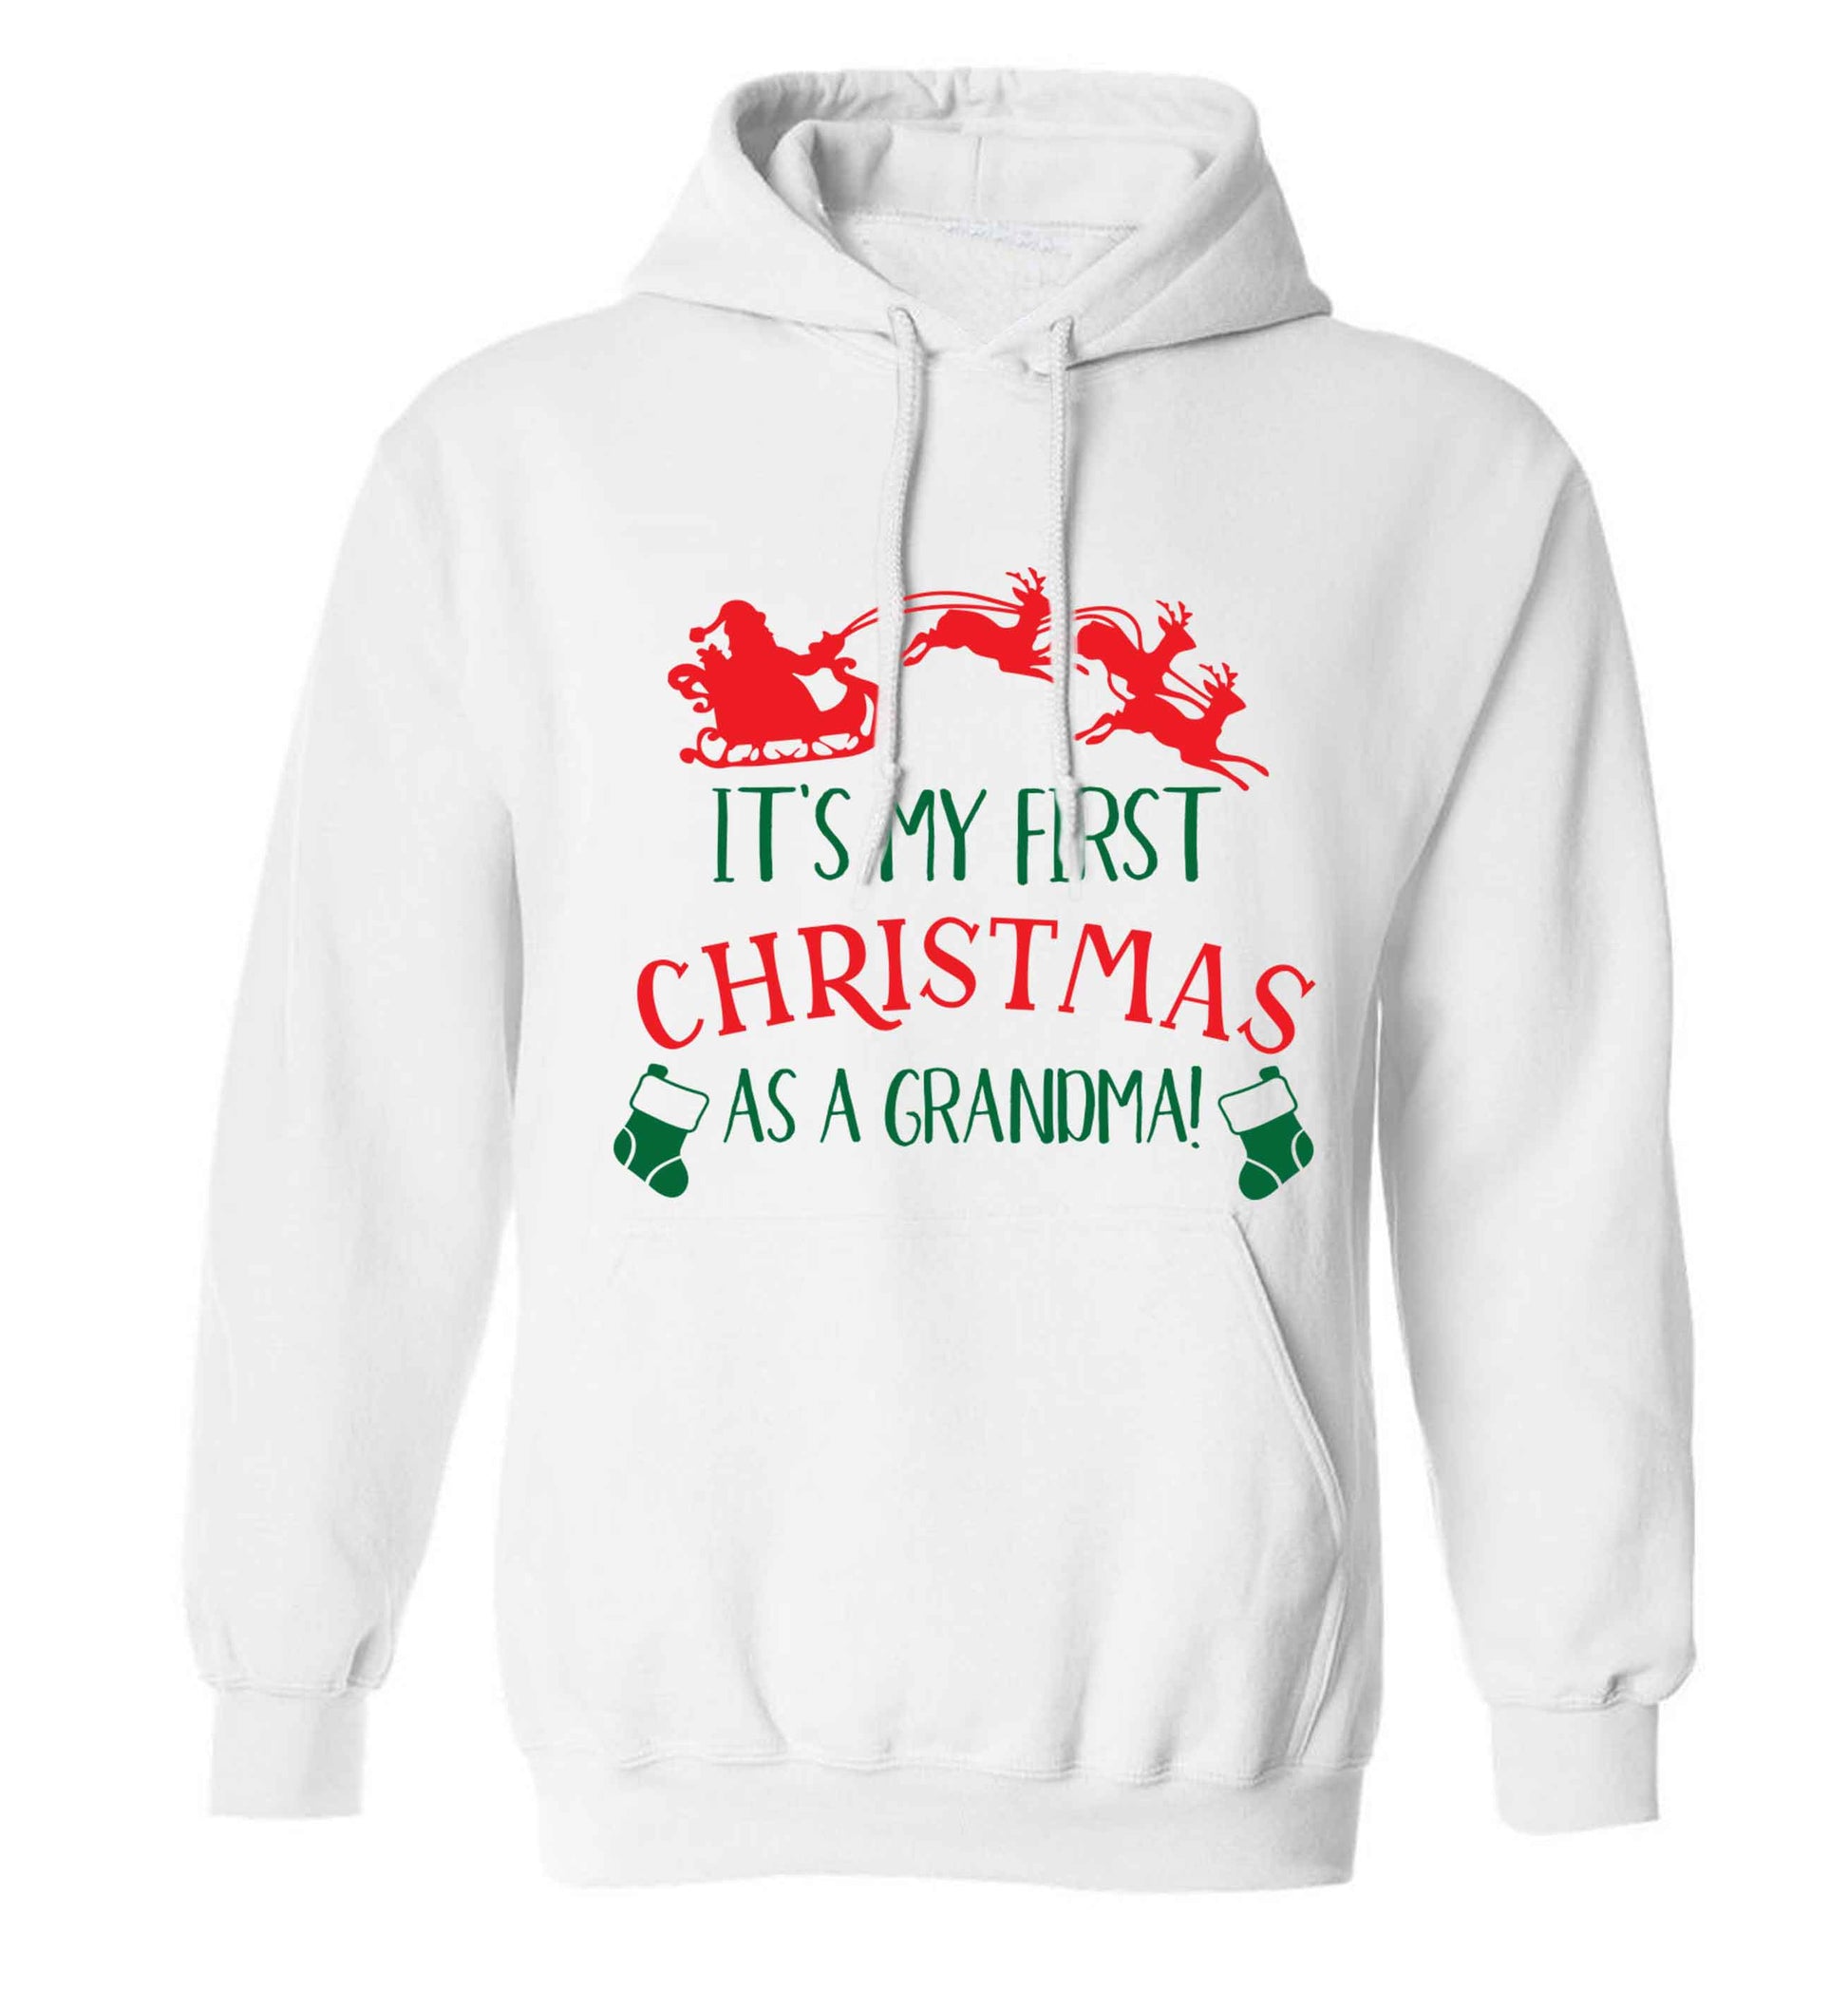 It's my first Christmas as a grandma! adults unisex white hoodie 2XL